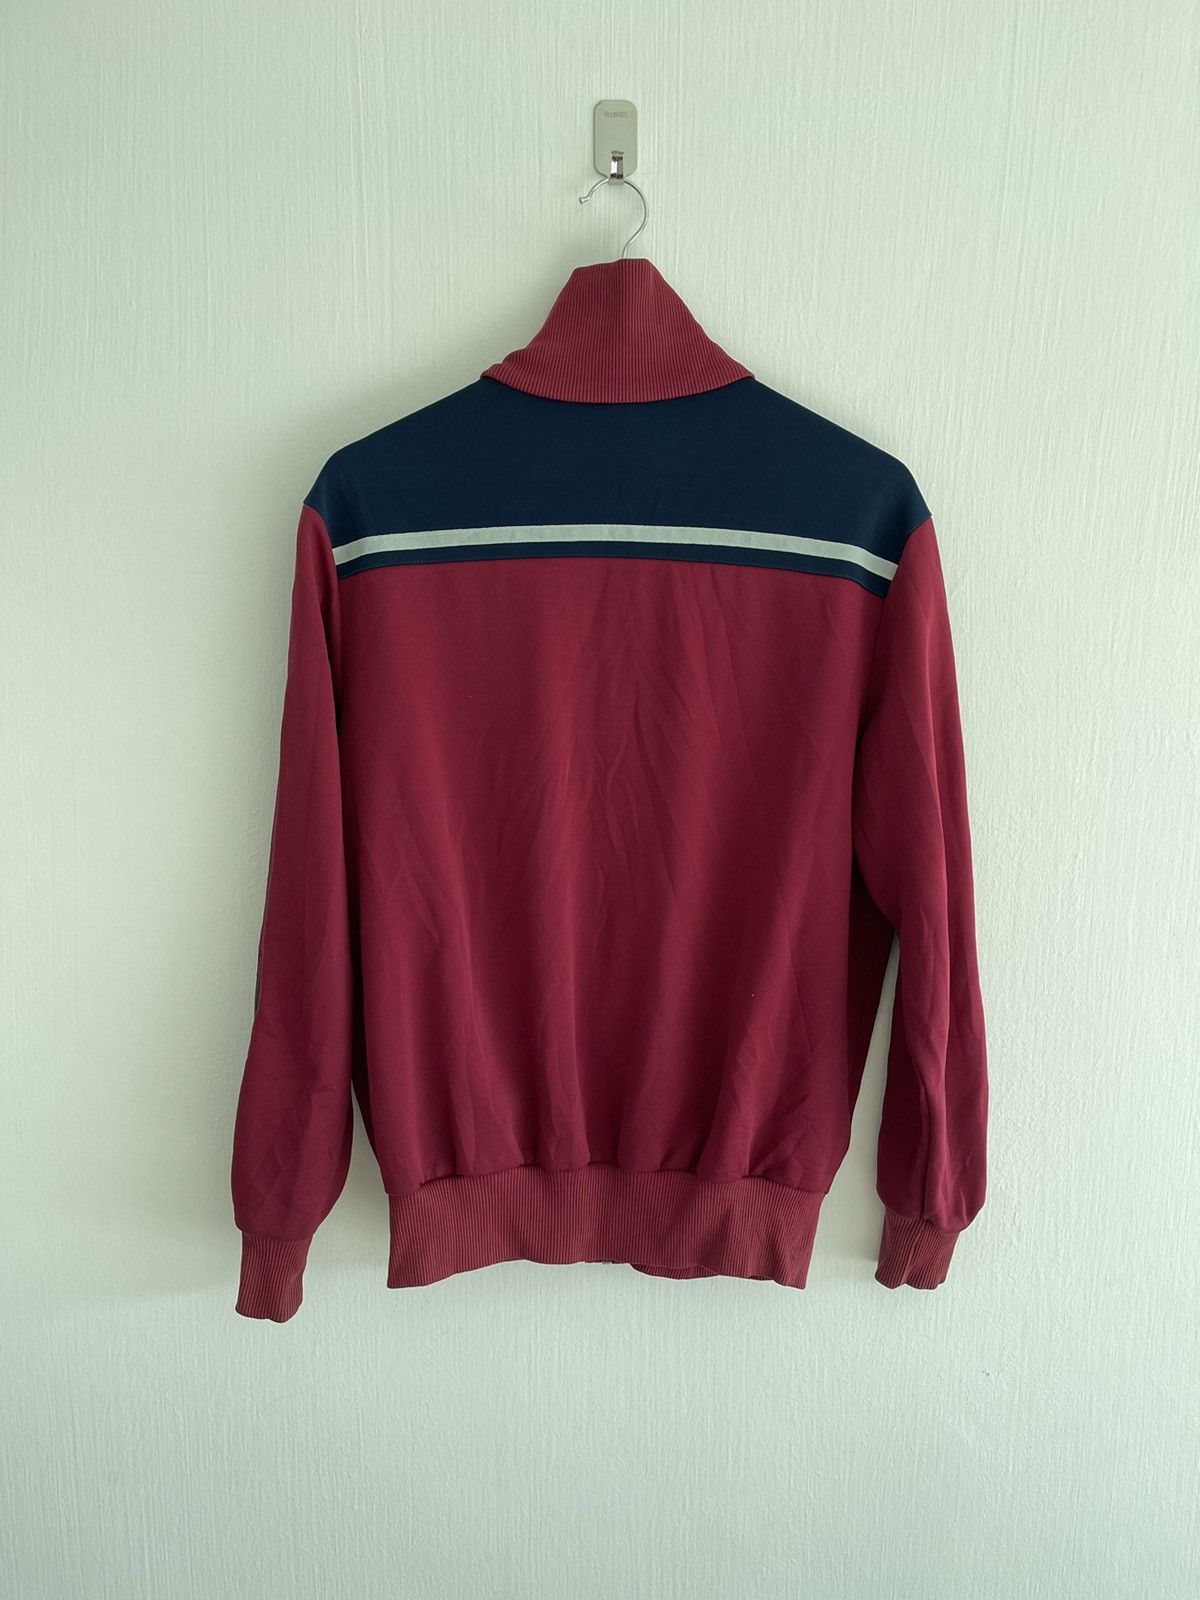 Adidas Vintage Track Top Jacket Made in Taiwan - 2